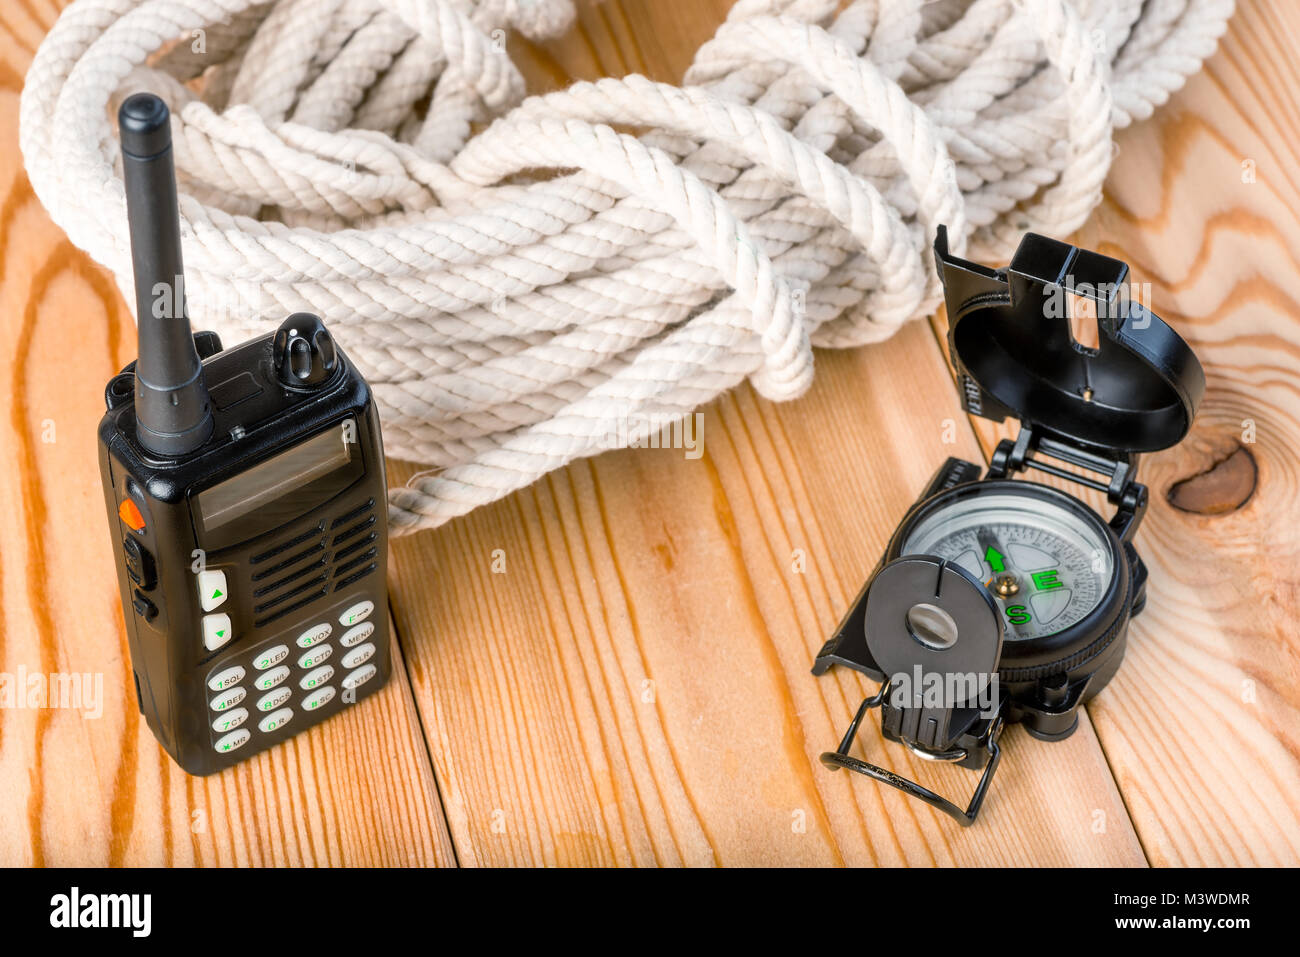 rope and navigation equipment for a complex and dangerous hike into the mountains,on a wooden background Stock Photo